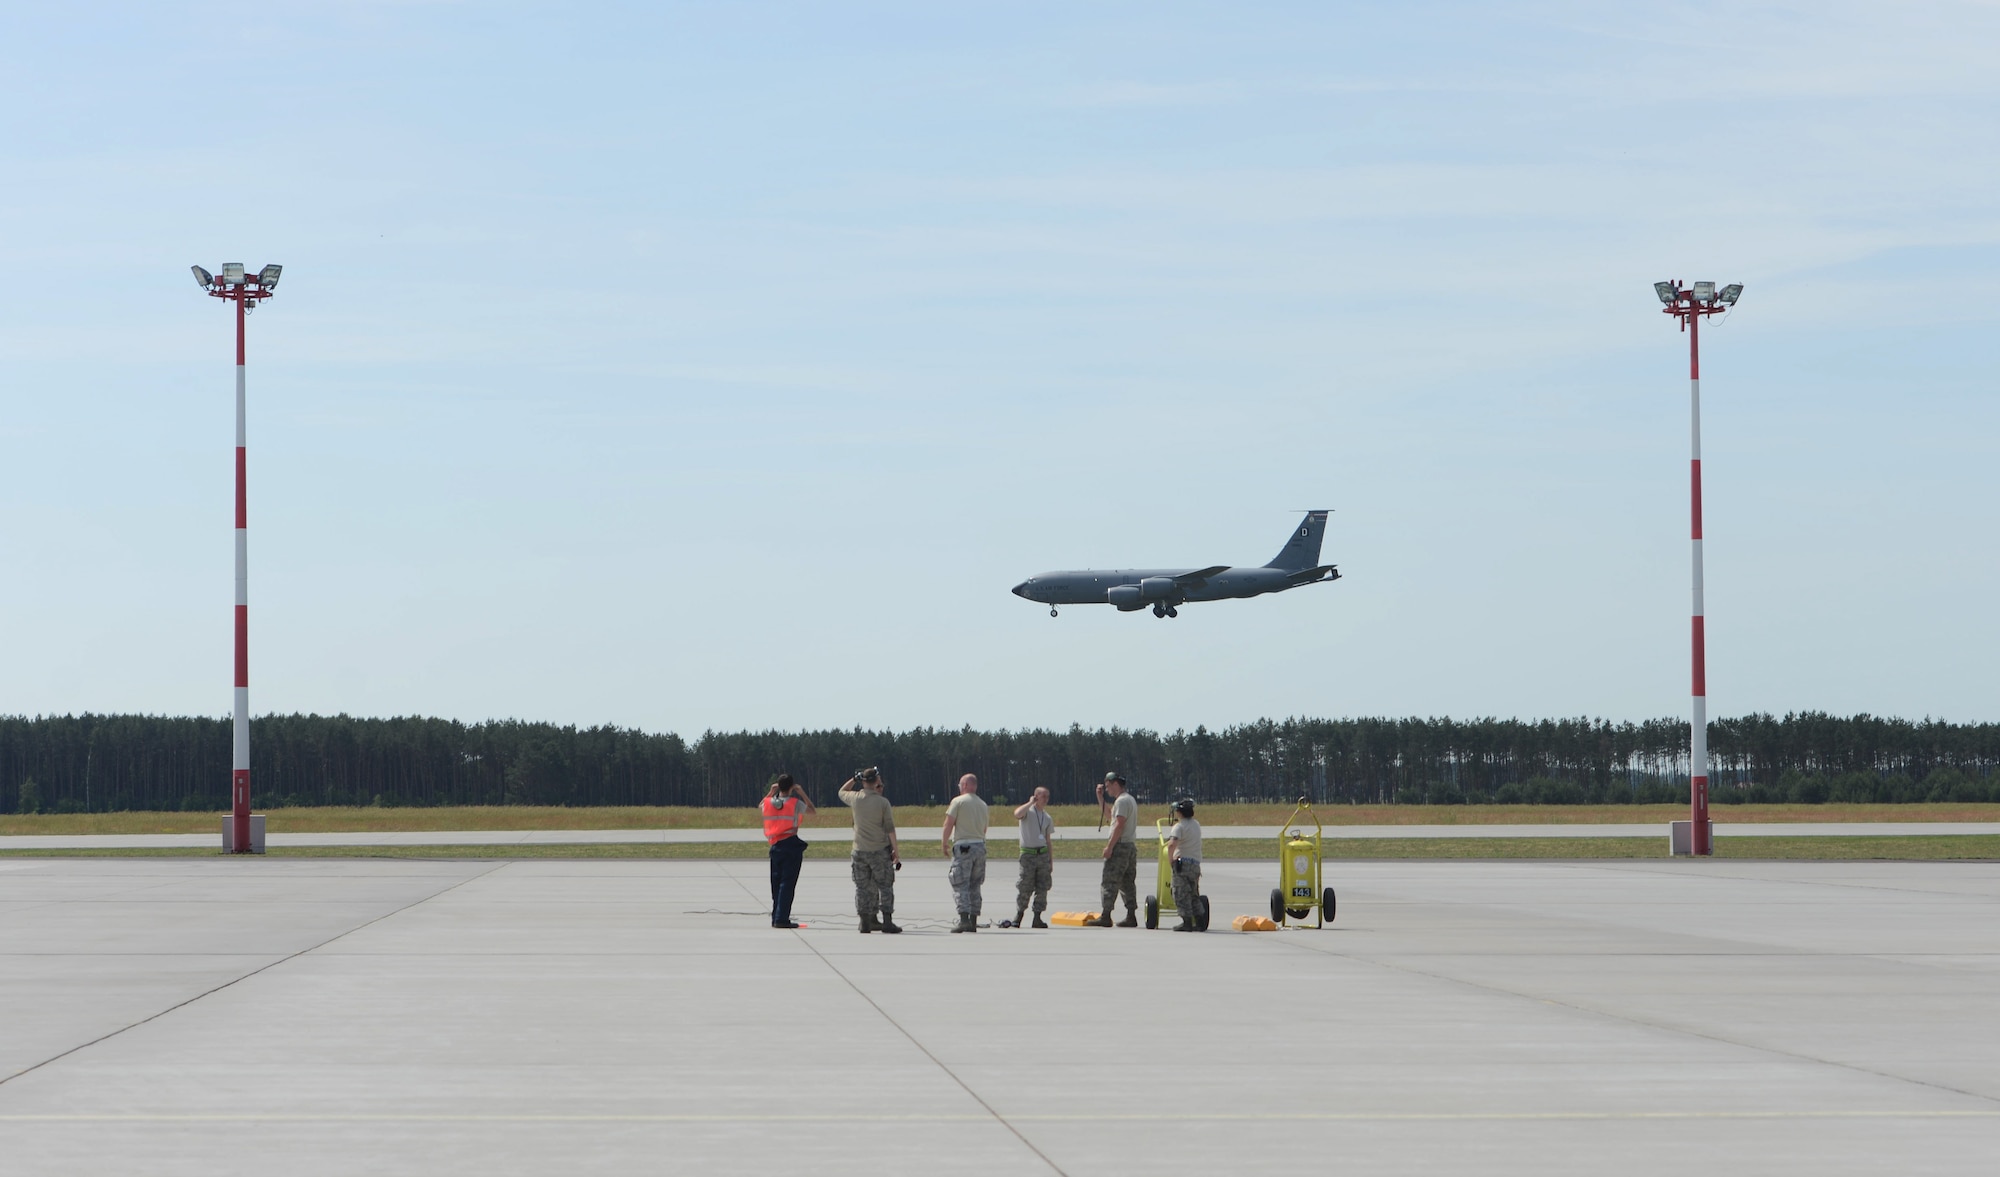 U.S. Air Force 351st Expeditionary Air Refueling Squadron-Poland maintainers watch a KC-135 Stratotanker land June 11, 2014, on Powidz Air Base, Poland, after the aircraft completed a Baltic Operations Exercise mission. Ten maintainers are working in Poland to support BALTOPS and make sure the aircraft is safe and ready for every mission. (U.S. Air Force photo/Airman 1st Class Kyla Gifford/Released)